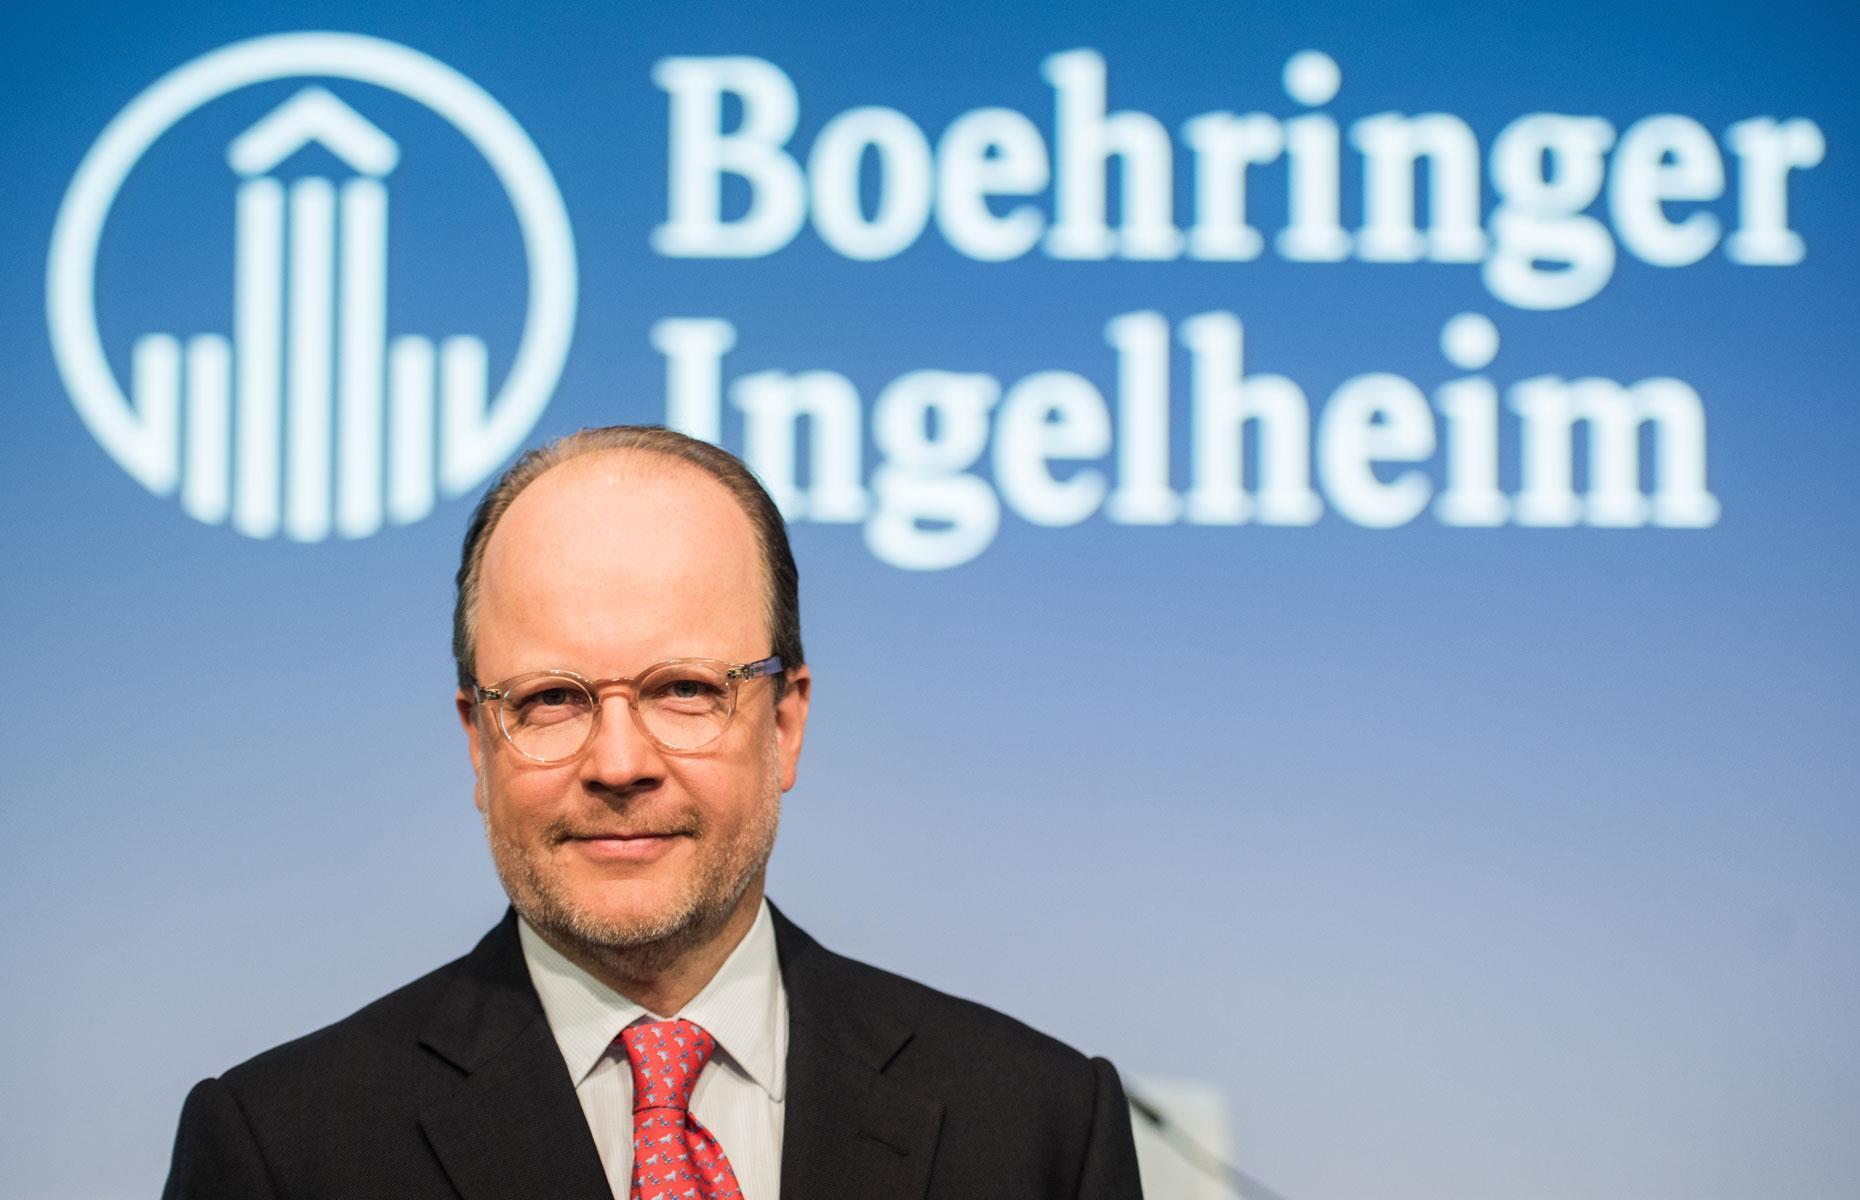 <p>Founded in 1885 in Germany by Albert Boehringer, Boehringer Ingelheim initially produced tartaric acid for the food industry before branching out into pharmaceuticals.</p>  <p>Today, the drugmaker is one of the biggest pharma companies in the world. Boehringer's descendants control the family firm, with scion Hubertus von Baumbach (pictured) serving as company chairman.</p>  <p>Combined, the dynasty is worth a whopping $59.2 billion, according to <em>India Times. </em></p>